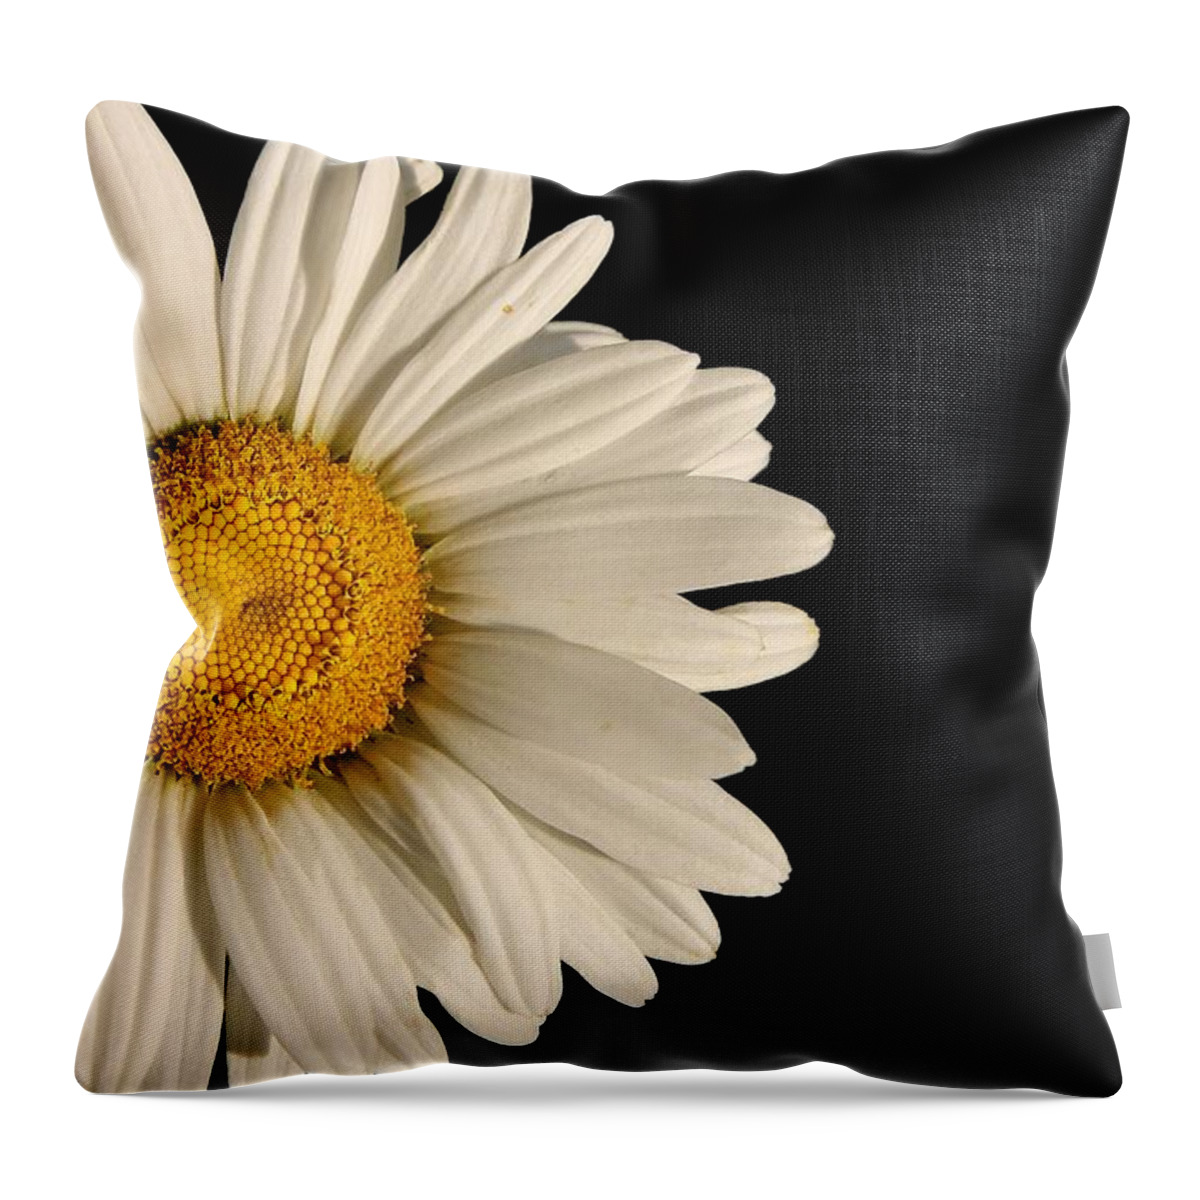 Beauty Throw Pillow featuring the photograph A Flower Named Daisy by David Andersen